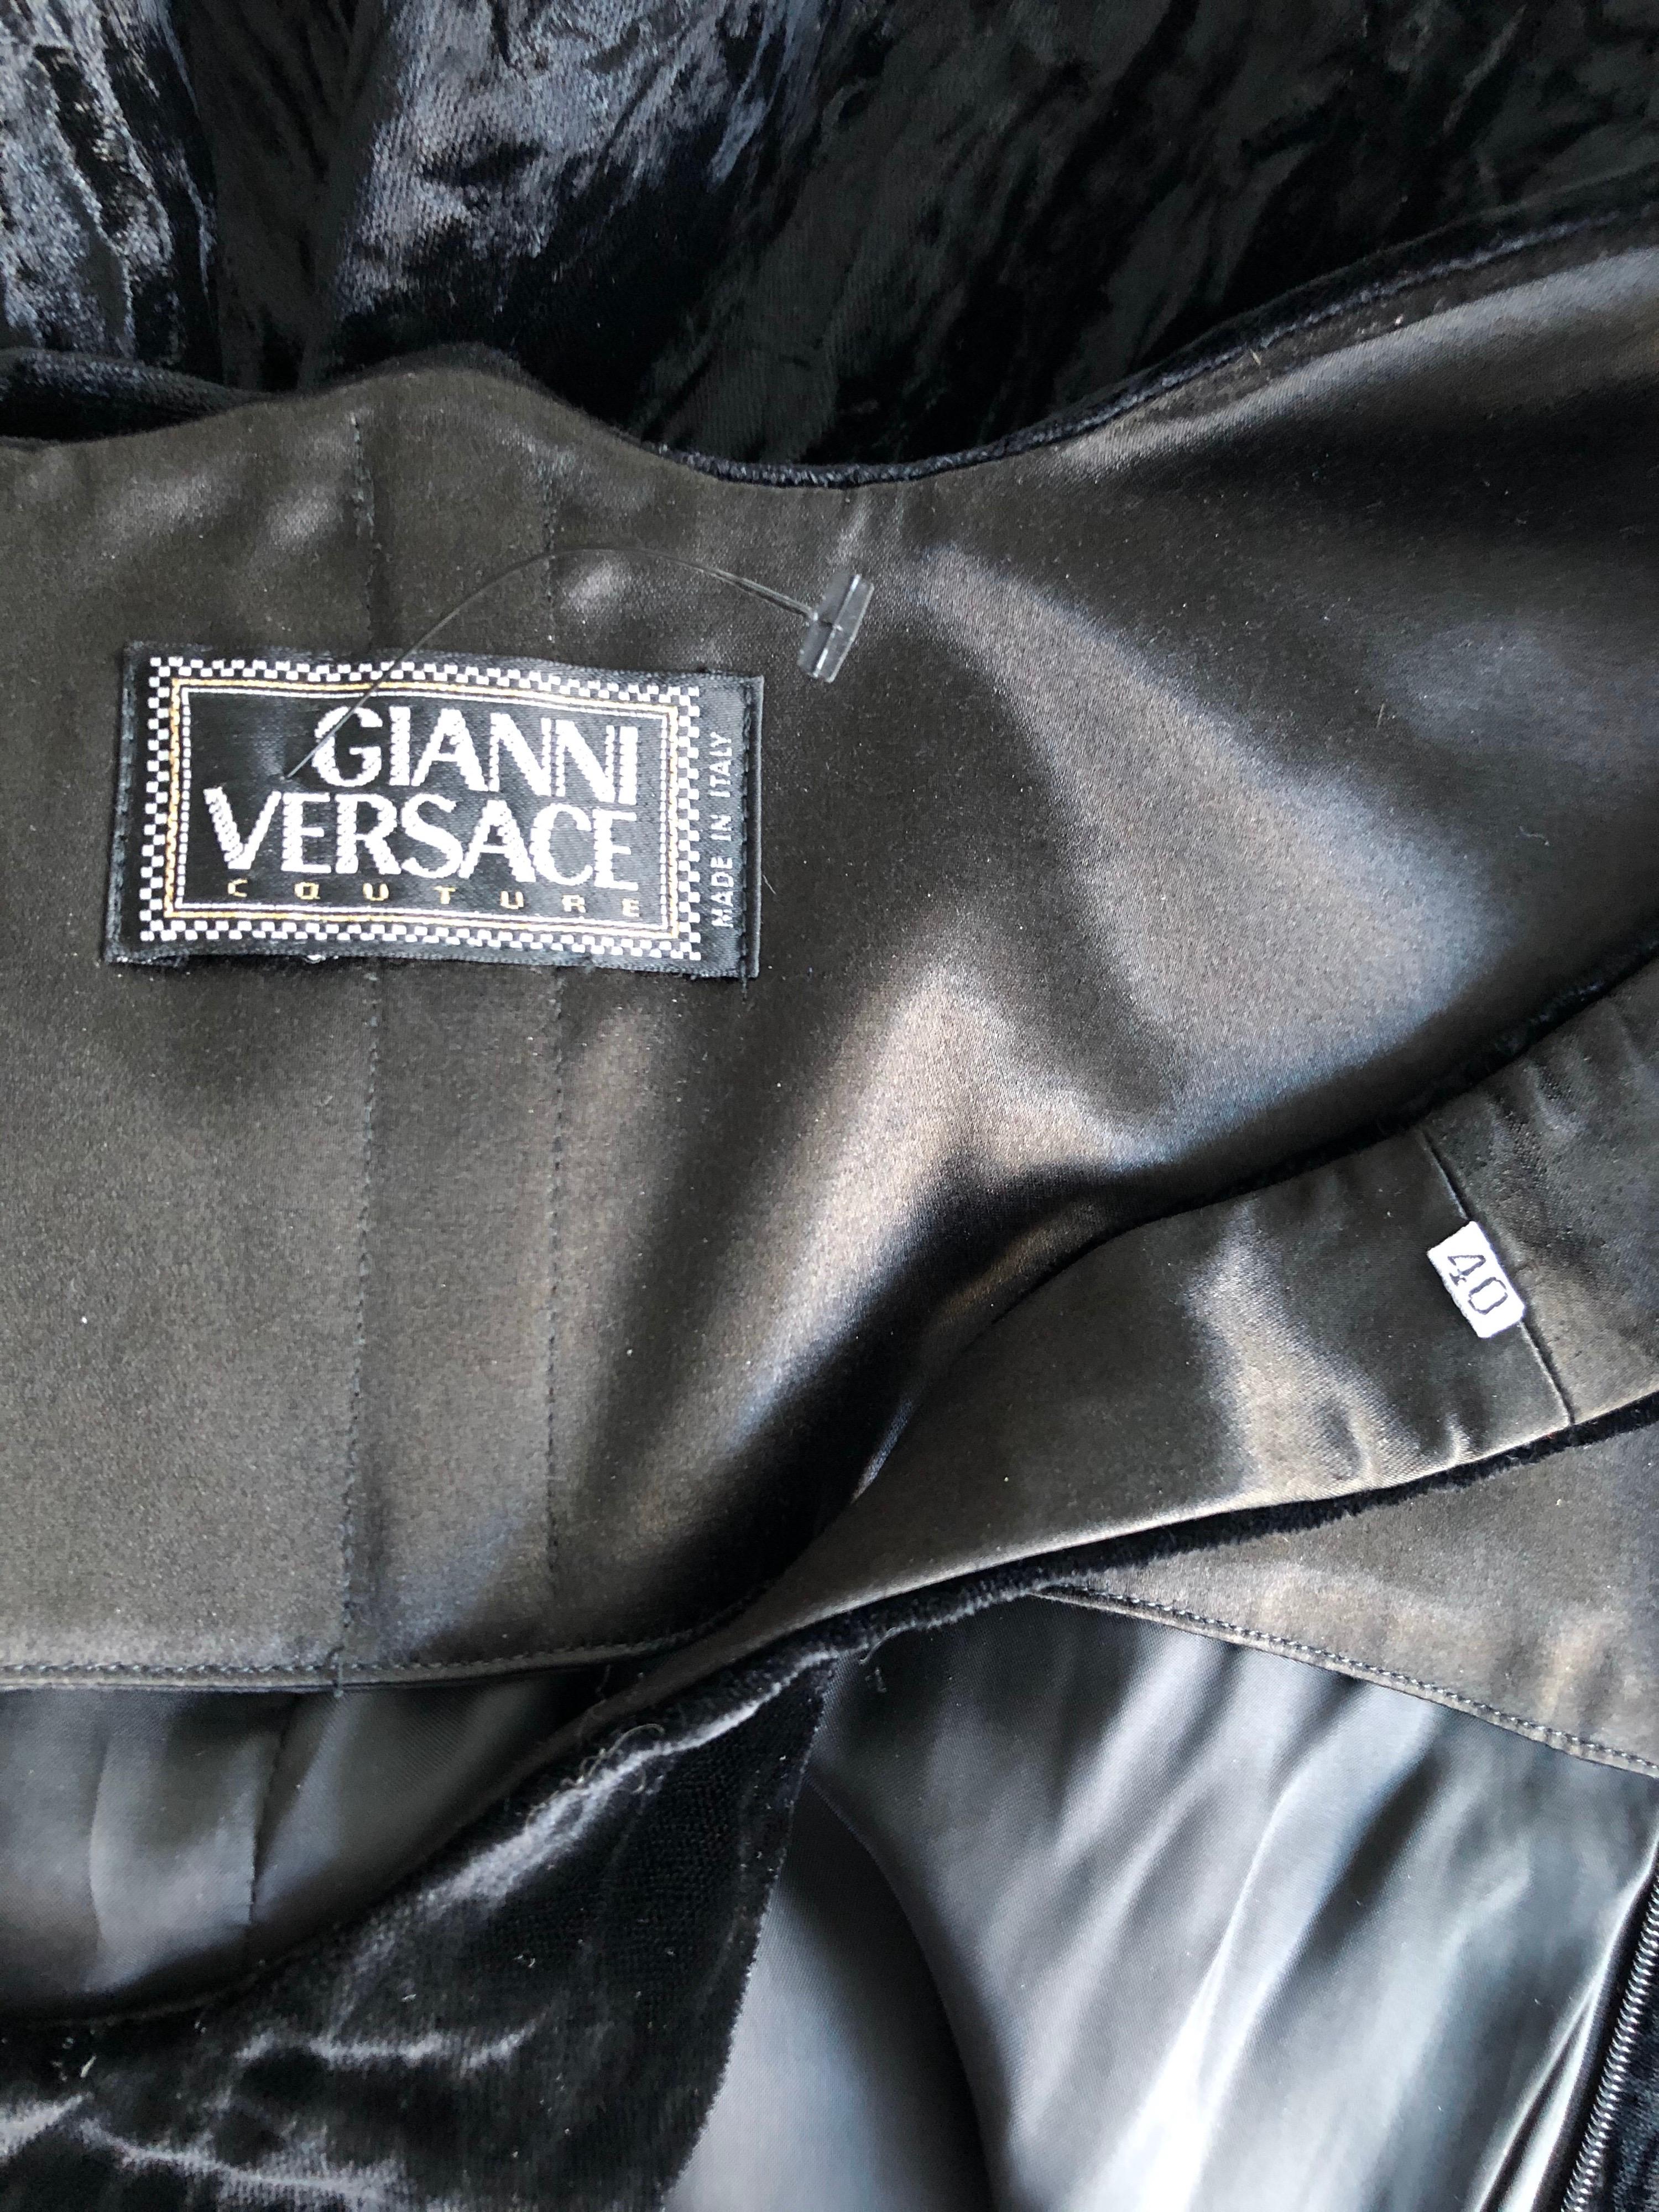 Gianni Versace F/W 1995 Runway Vintage Velvet Black Maxi Dress Gown In Good Condition For Sale In Naples, FL